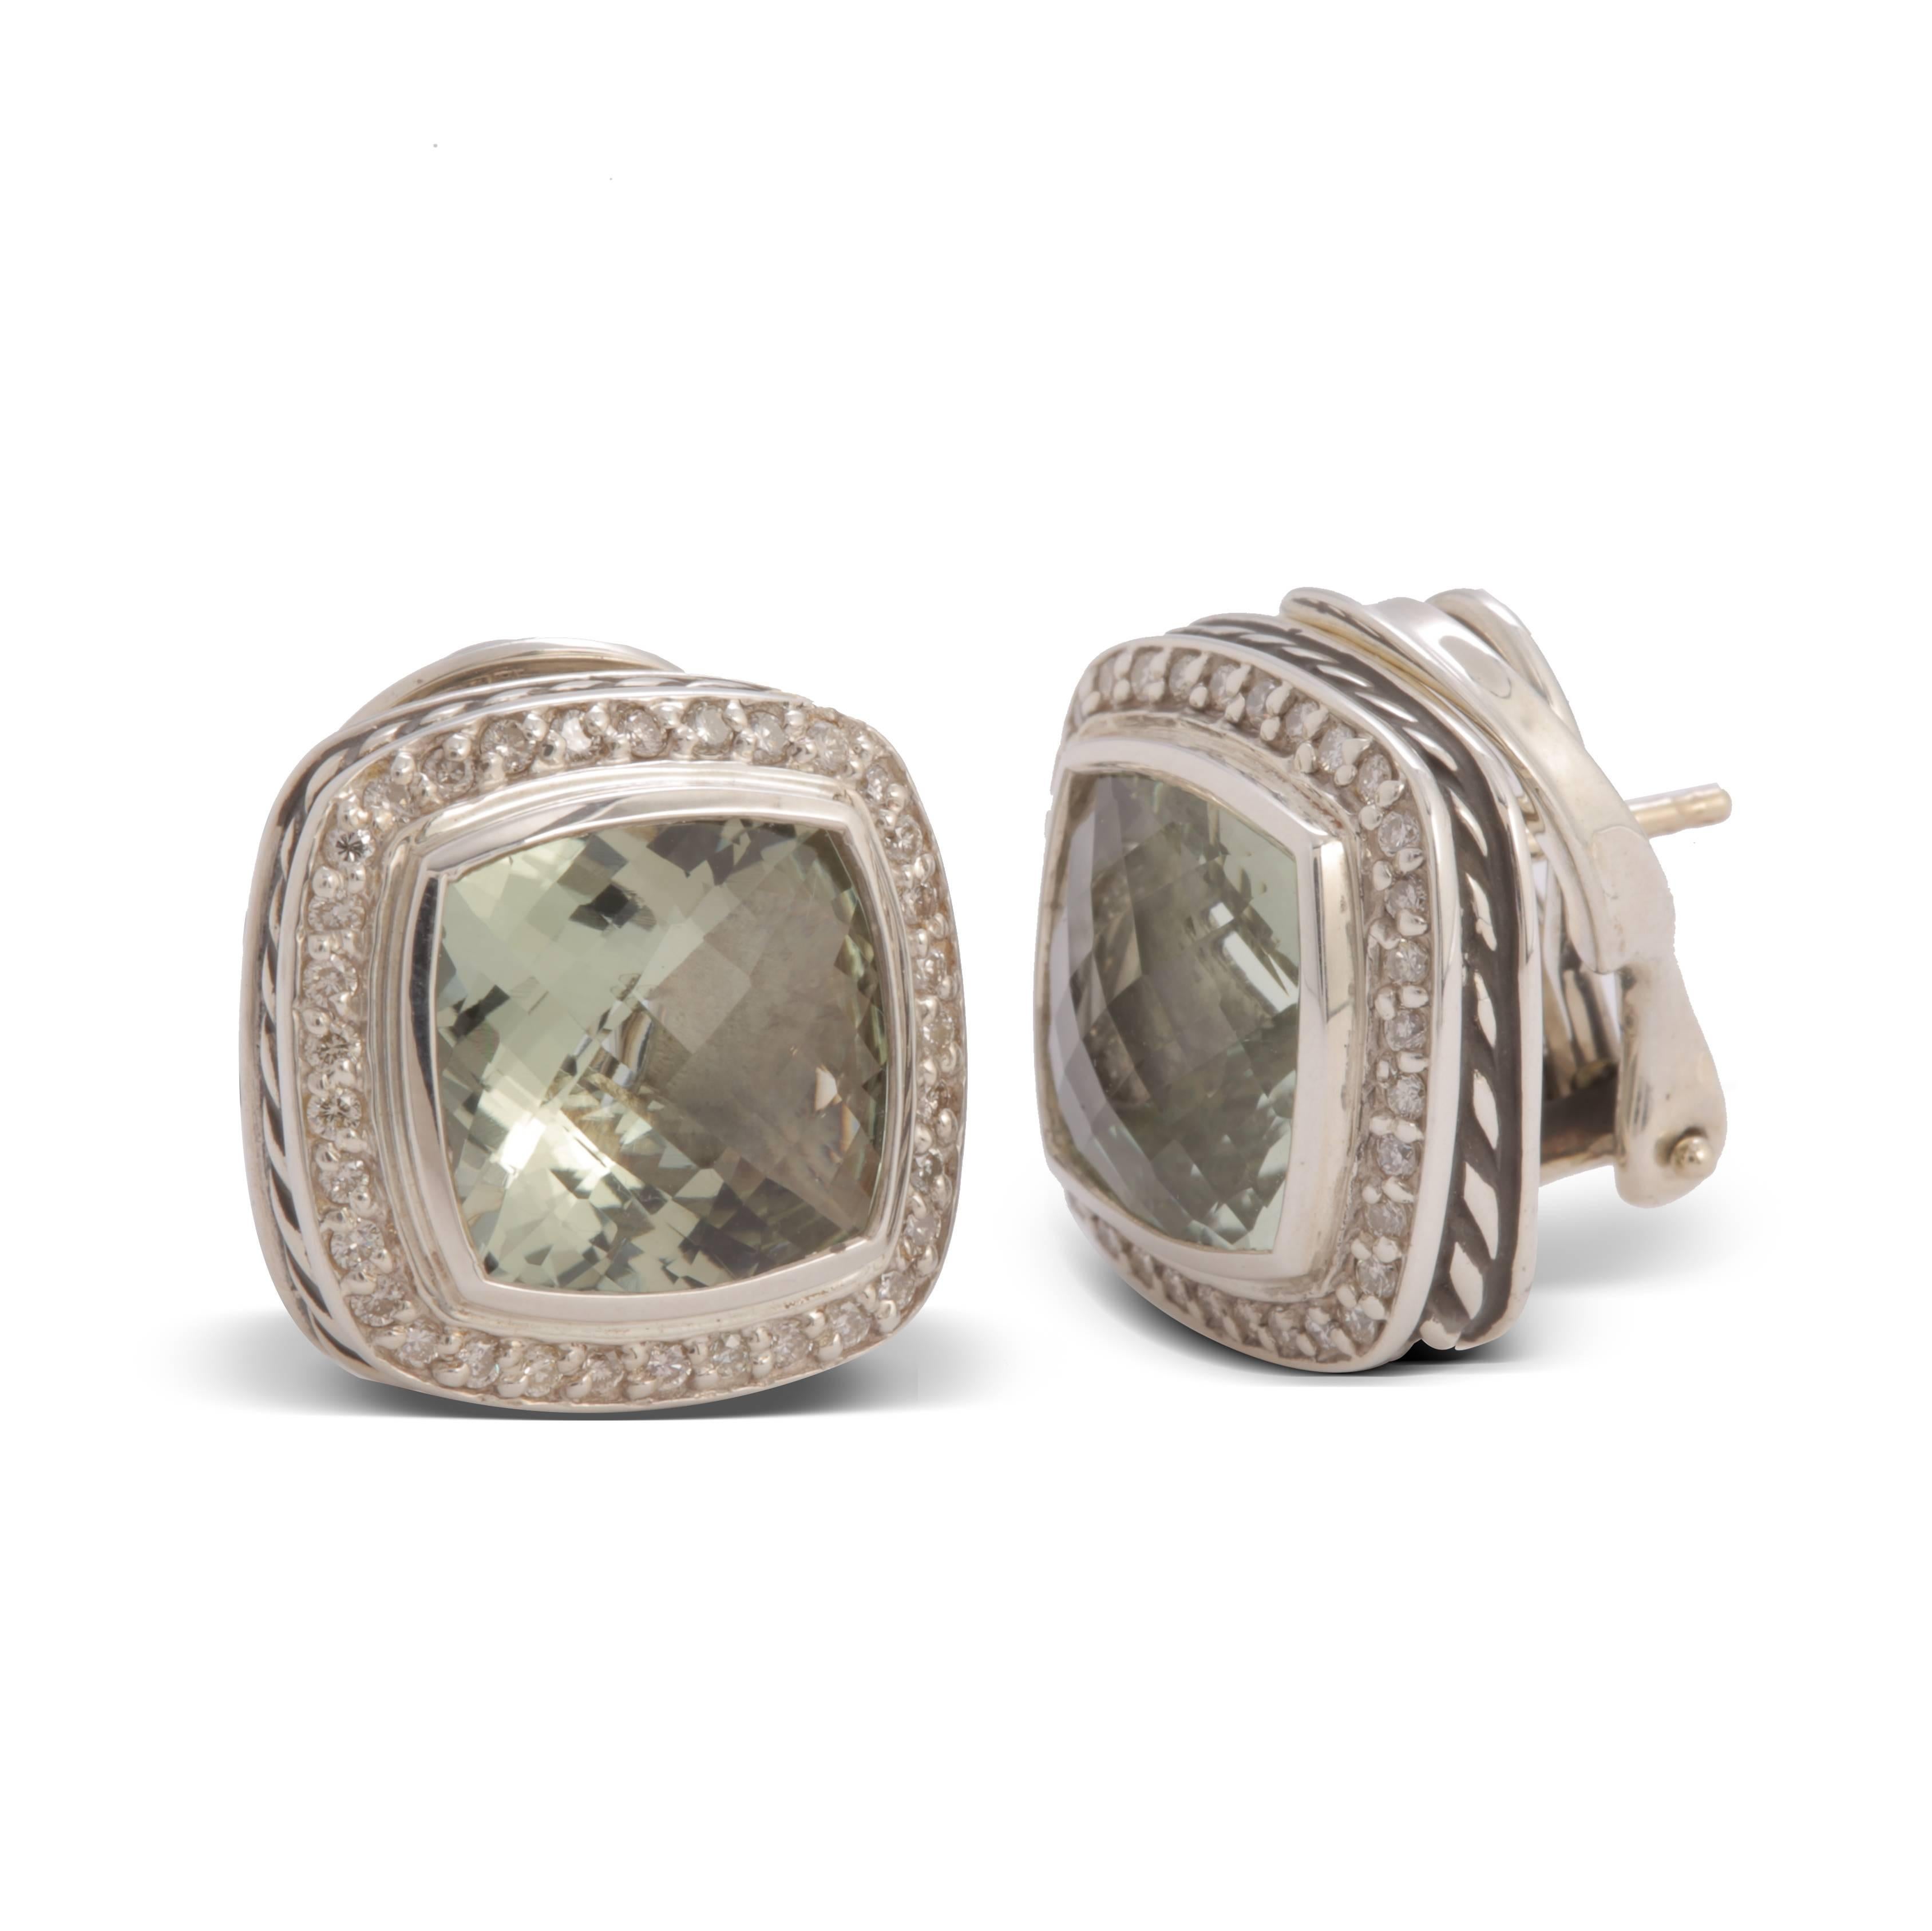 Previously loved sterling silver David Yurman earrings featuring a bezel set praisolite at center with round brilliant diamonds pave set throughout with omega closures.

